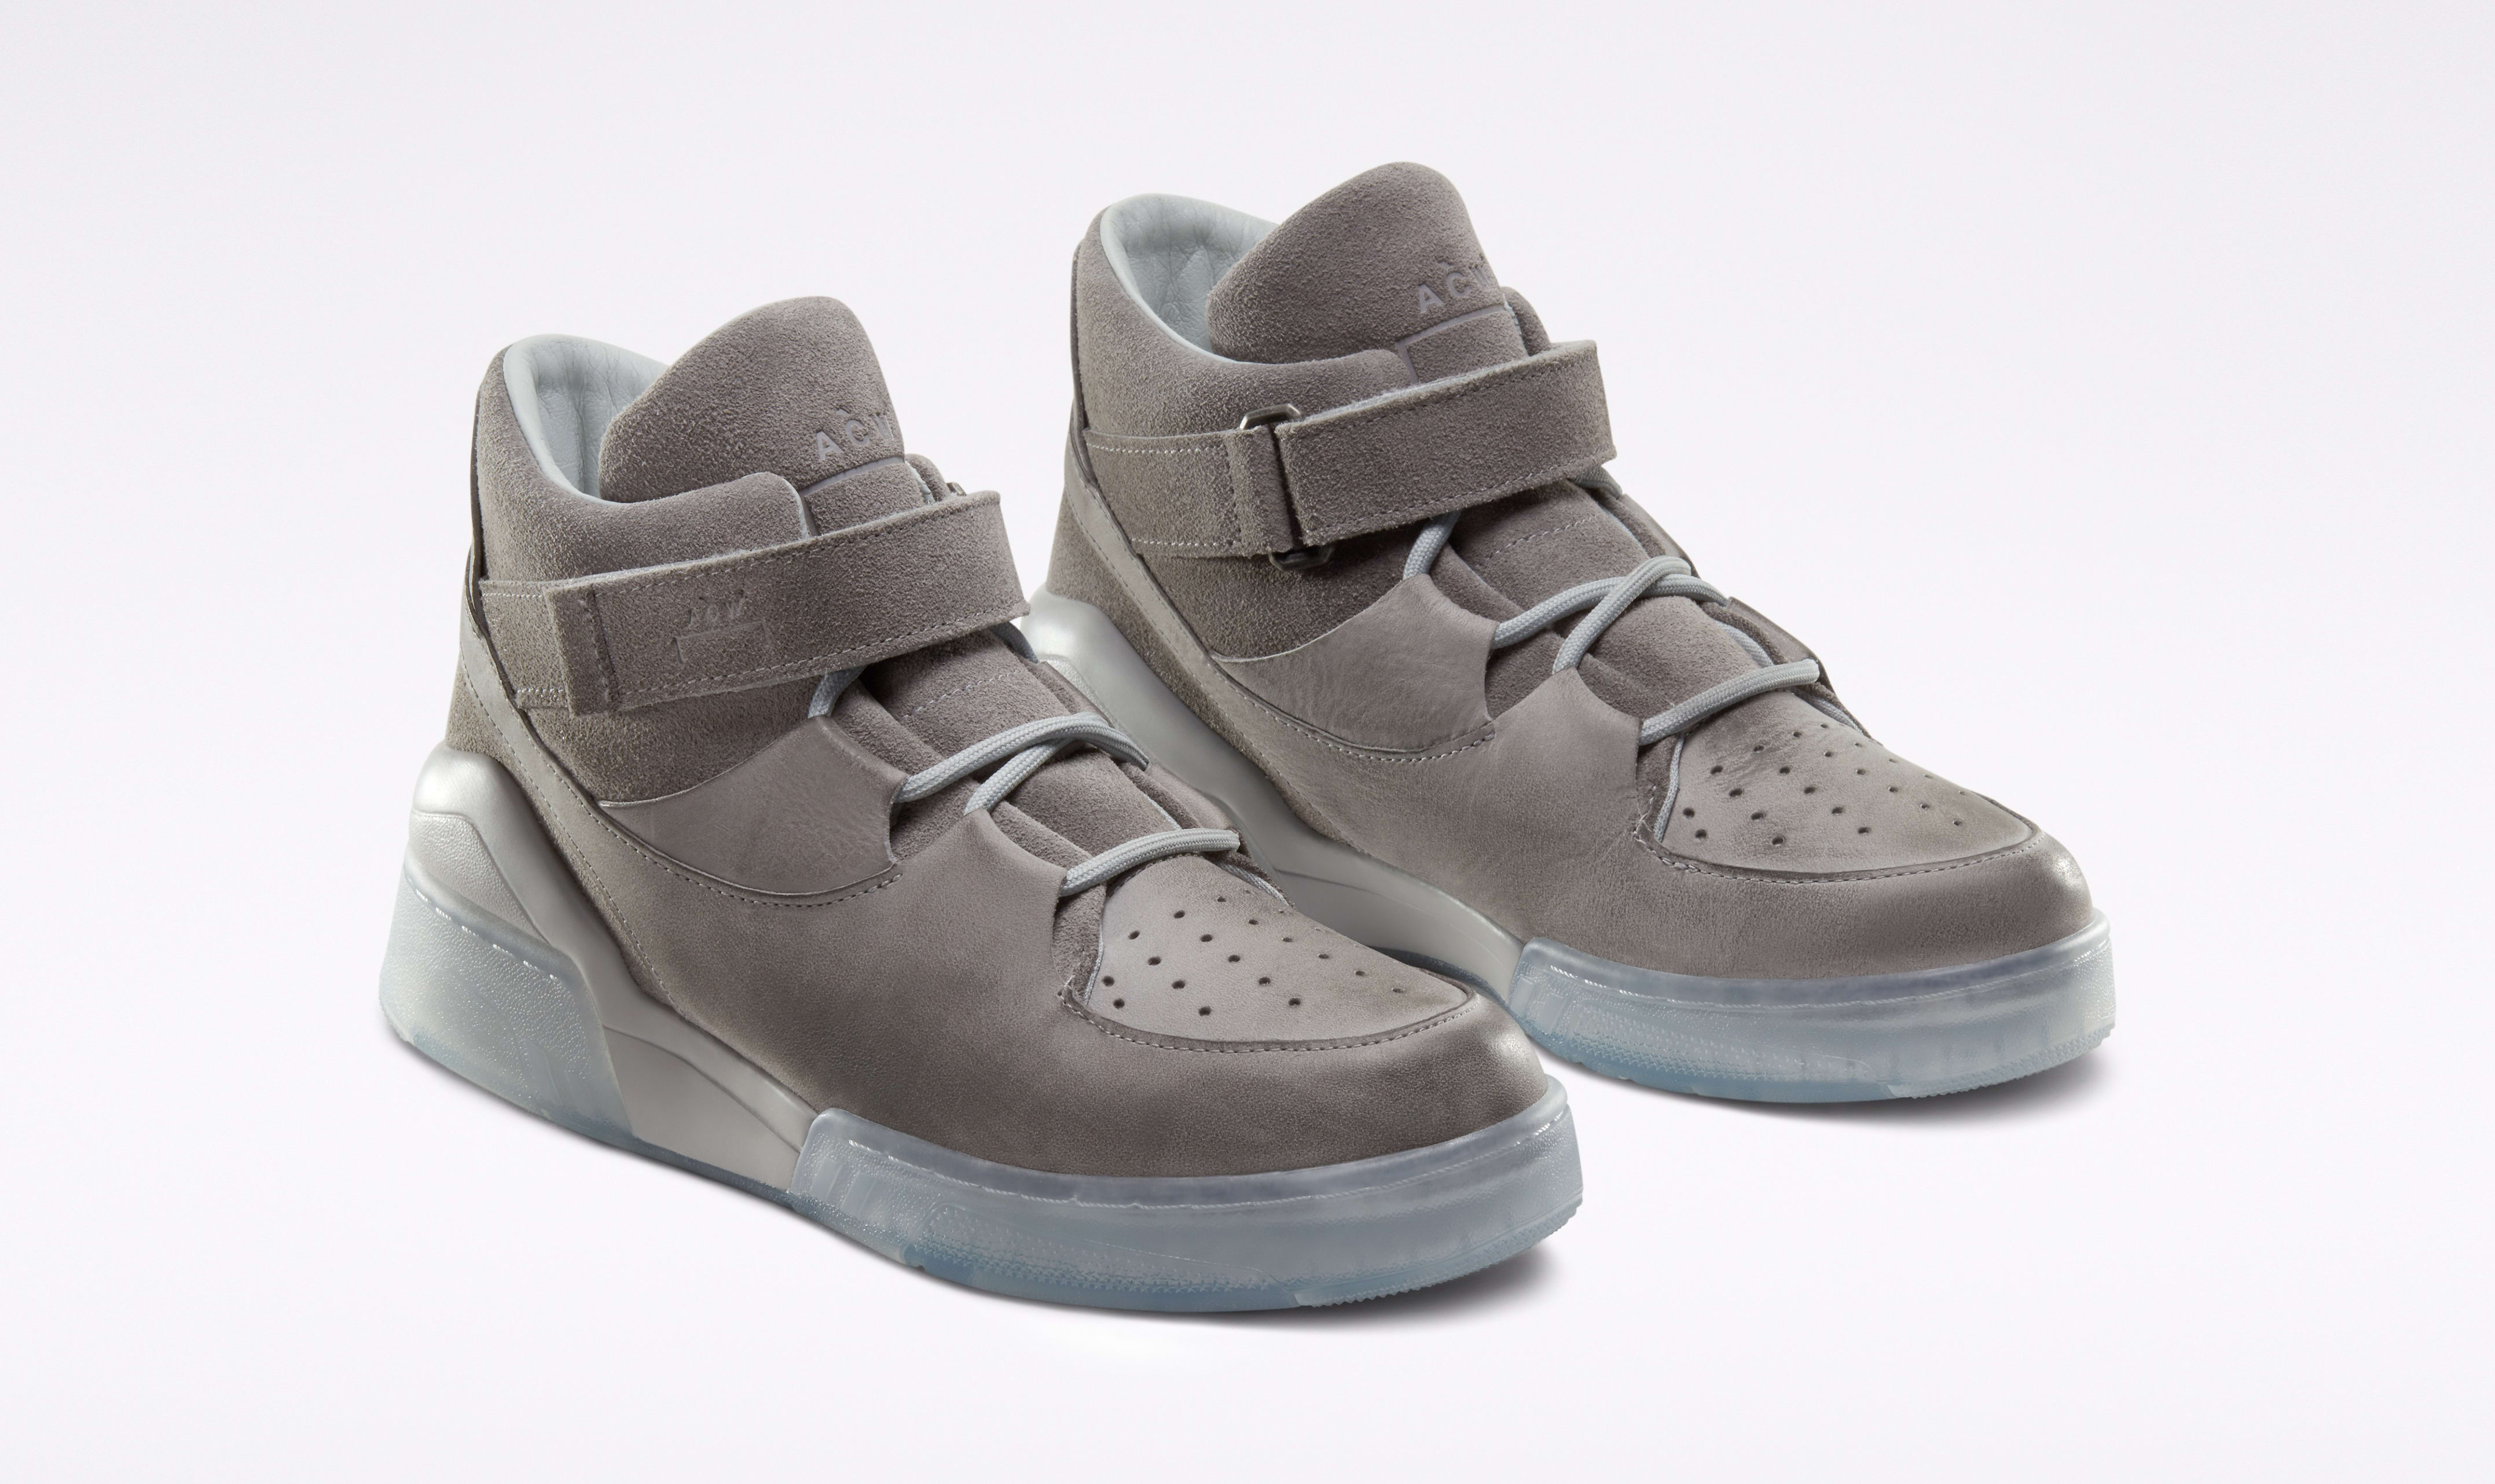 Converse x A-Cold-Wall sneaker collab delivers future-ready